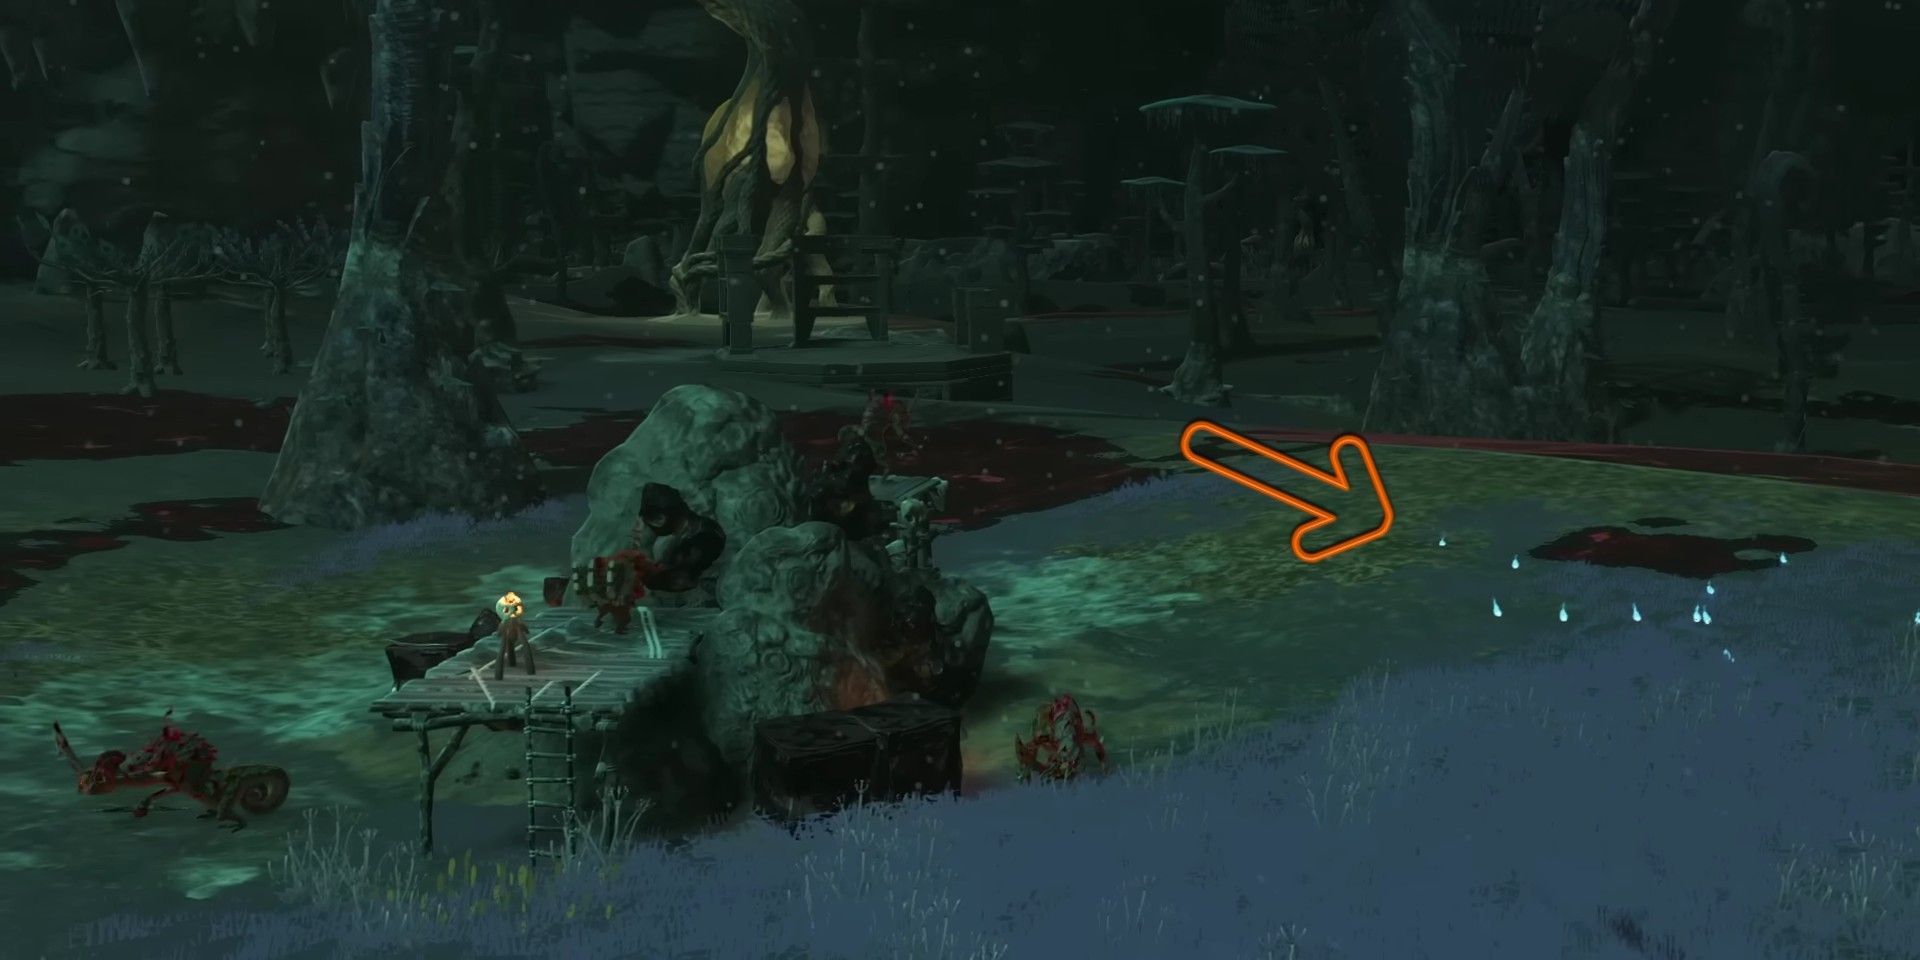 Tears of the Kingdom screenshots showing Bokoblins mining underground, with an arrow pointing toward a collection of glowing blue spirits on the ground next to them